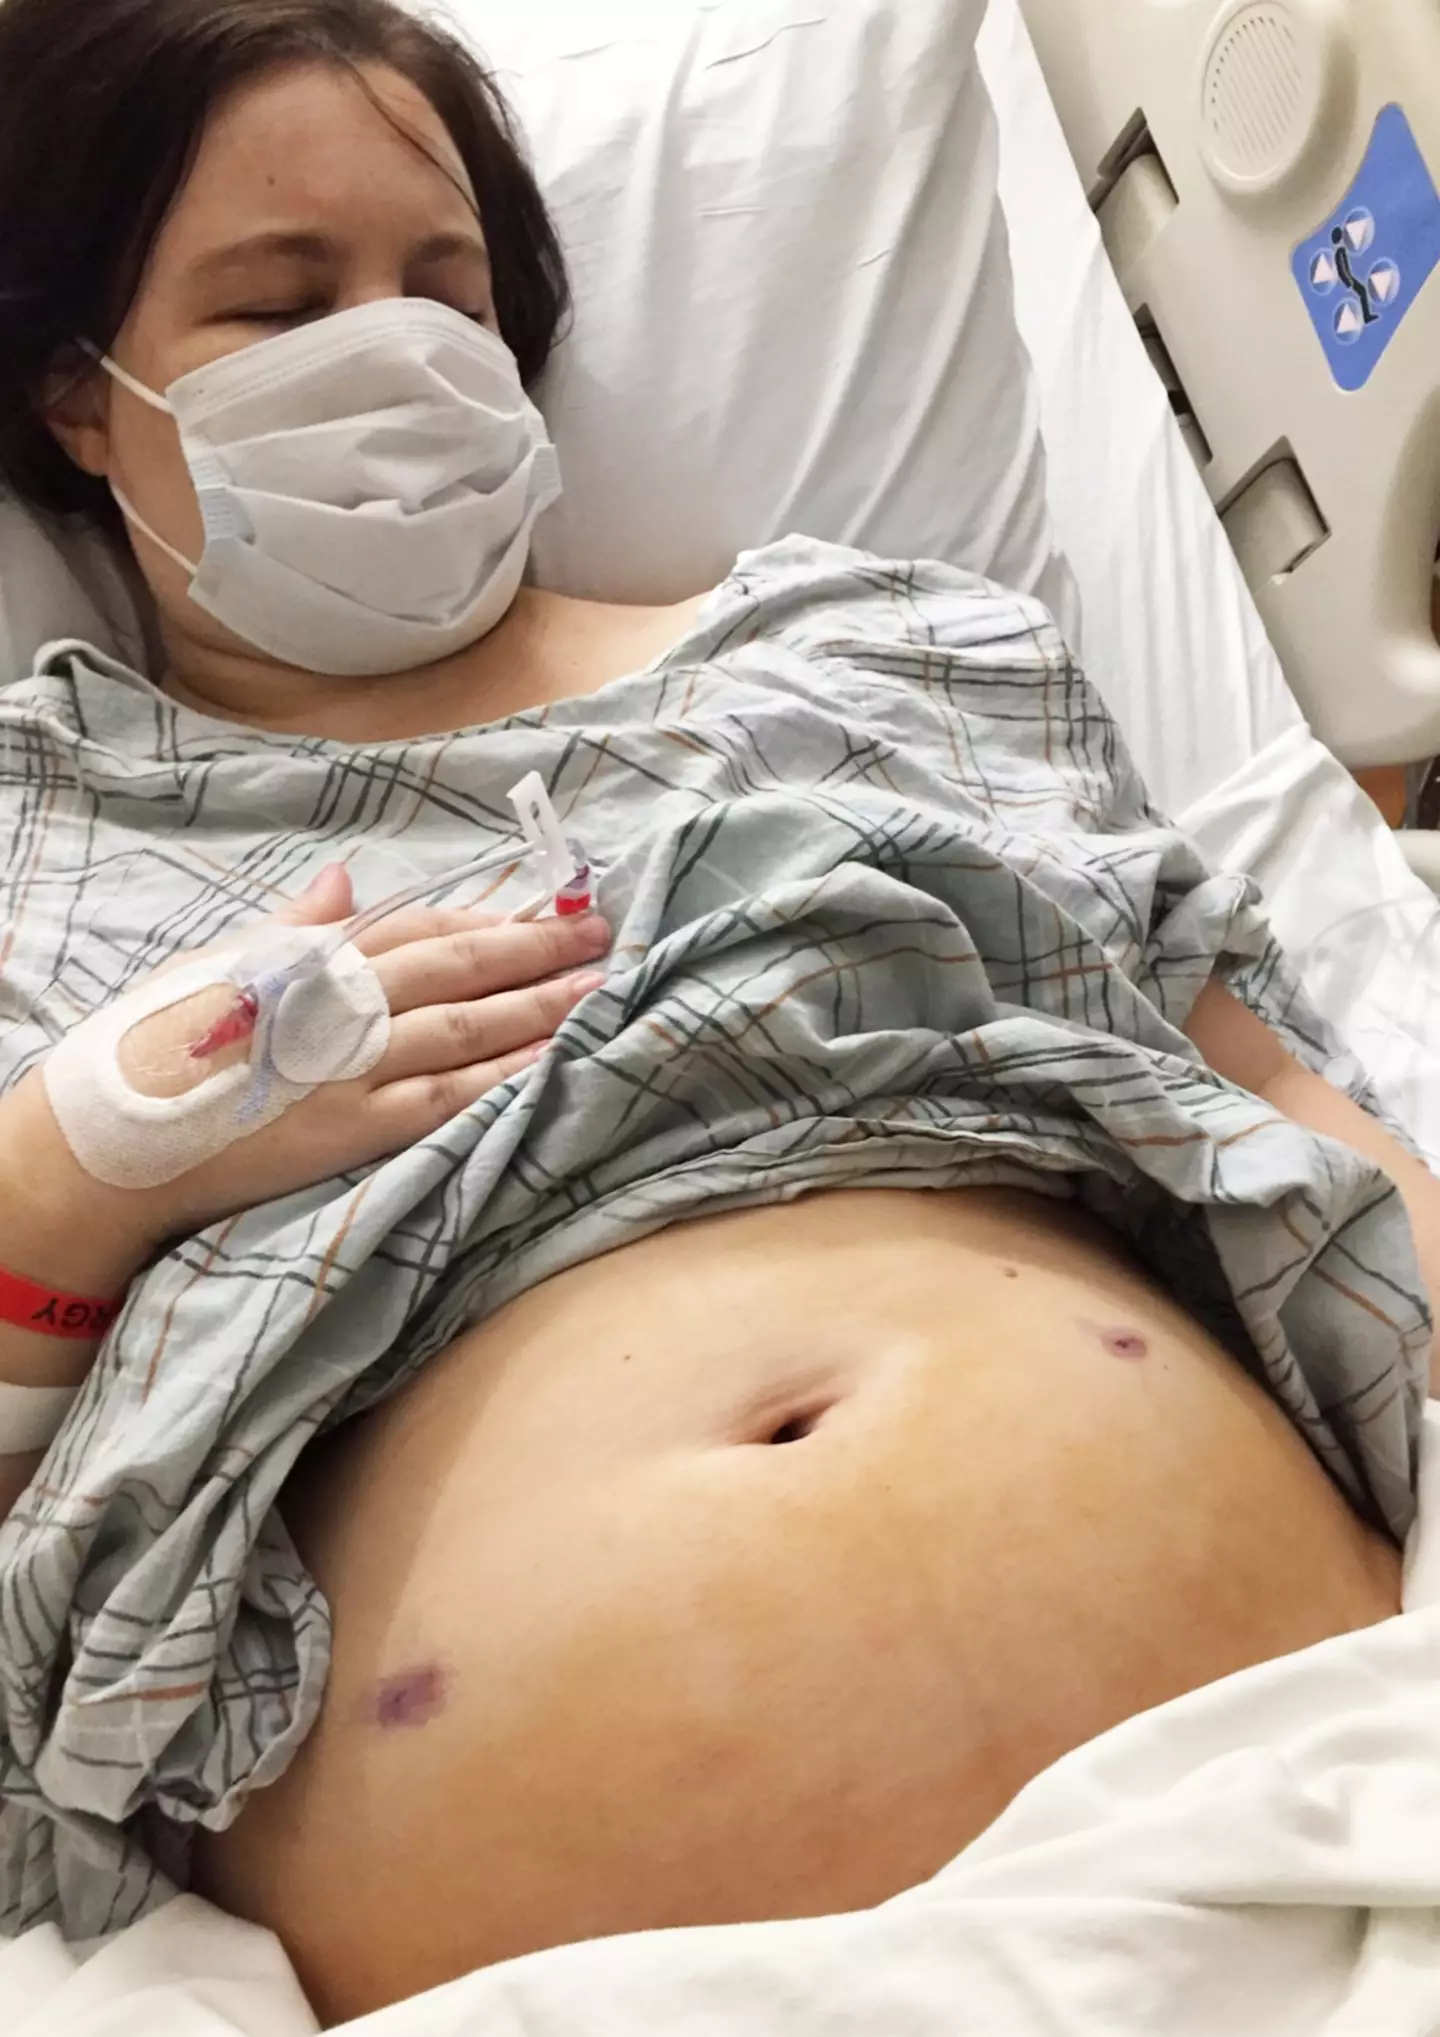 She wasn't diagnosed with endometriosis until the age of 34. (